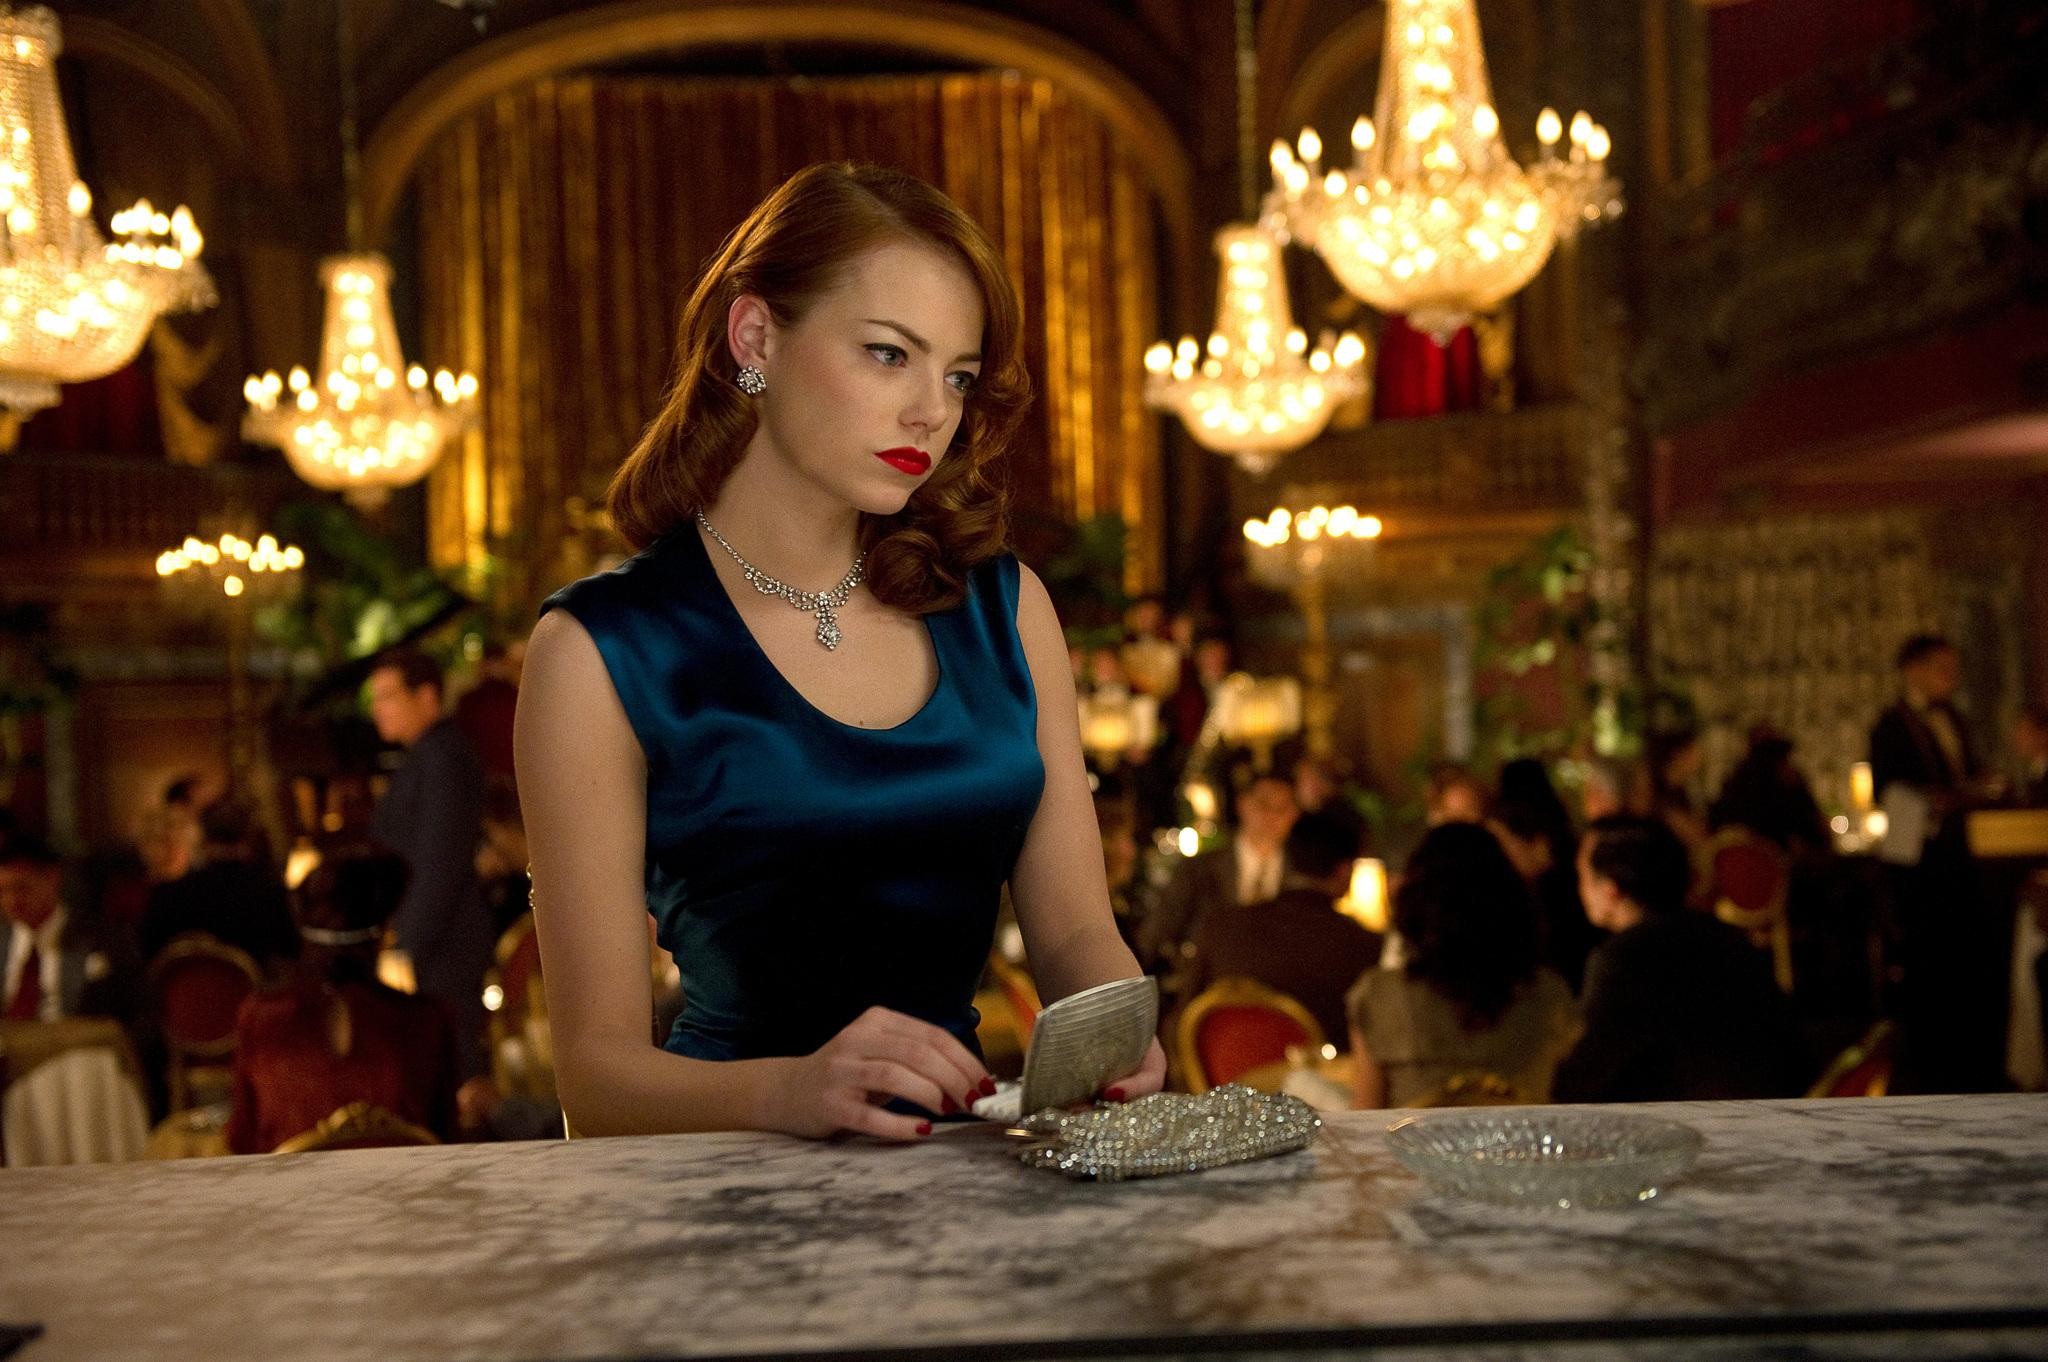 People 2048x1362 women Gangster Squad actress necklace movies Emma Stone redhead glamour classy dress blue dress celebrity women indoors glamour girls film stills